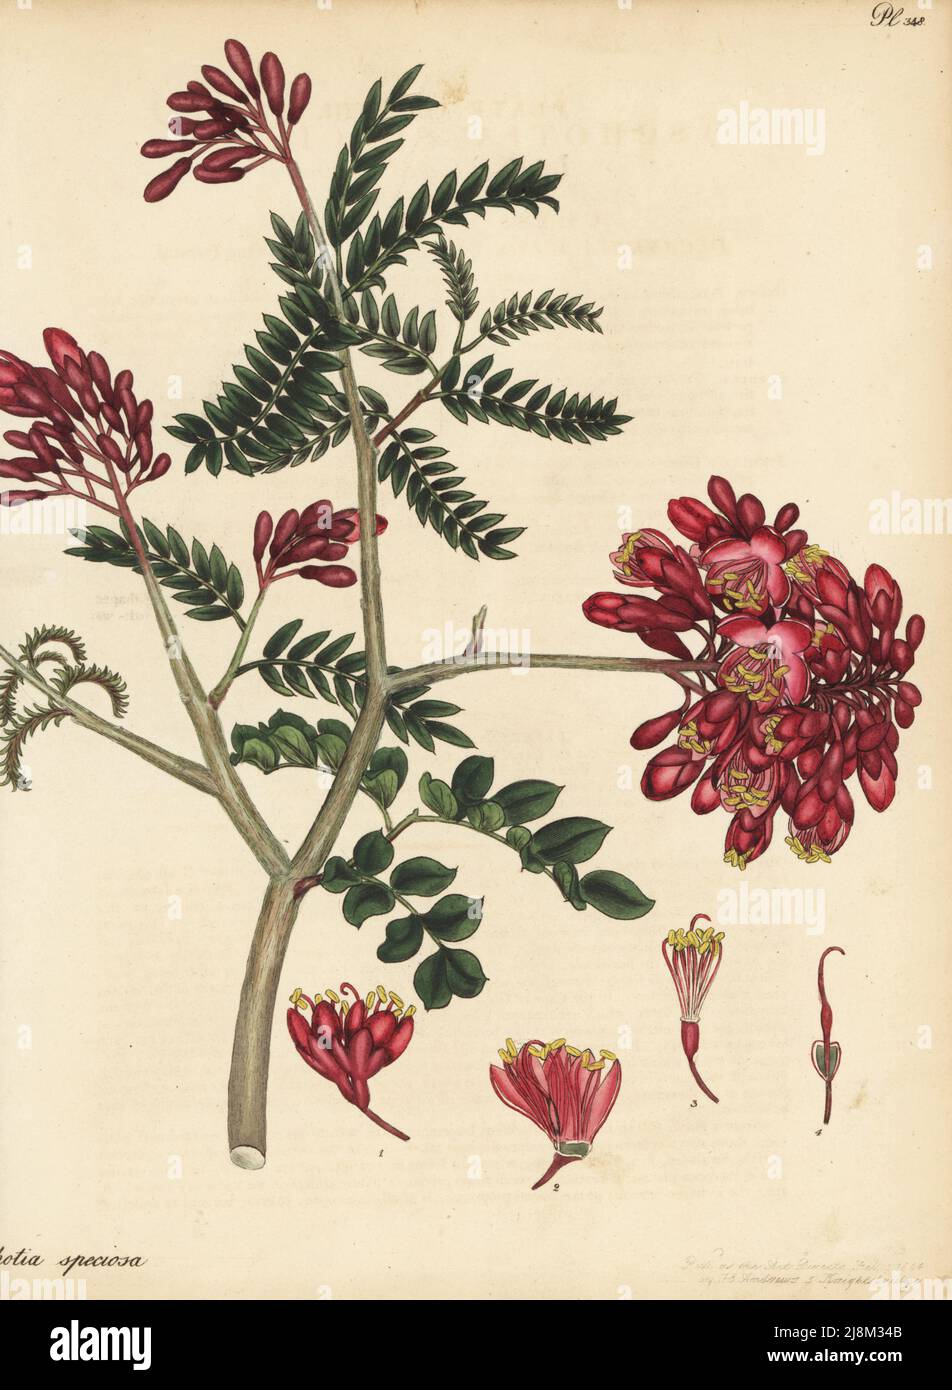 Schotia afra. Lenticus-leaved schotia, Schotia speciosa. From Africa, in the collection of radical quack Isaac Swainson's Botanic Gardens, Twickenham. Copperplate engraving drawn, engraved and hand-coloured by Henry Andrews from his Botanical Register, Volume 5, self-published in Knightsbridge, London, 1804. Stock Photo